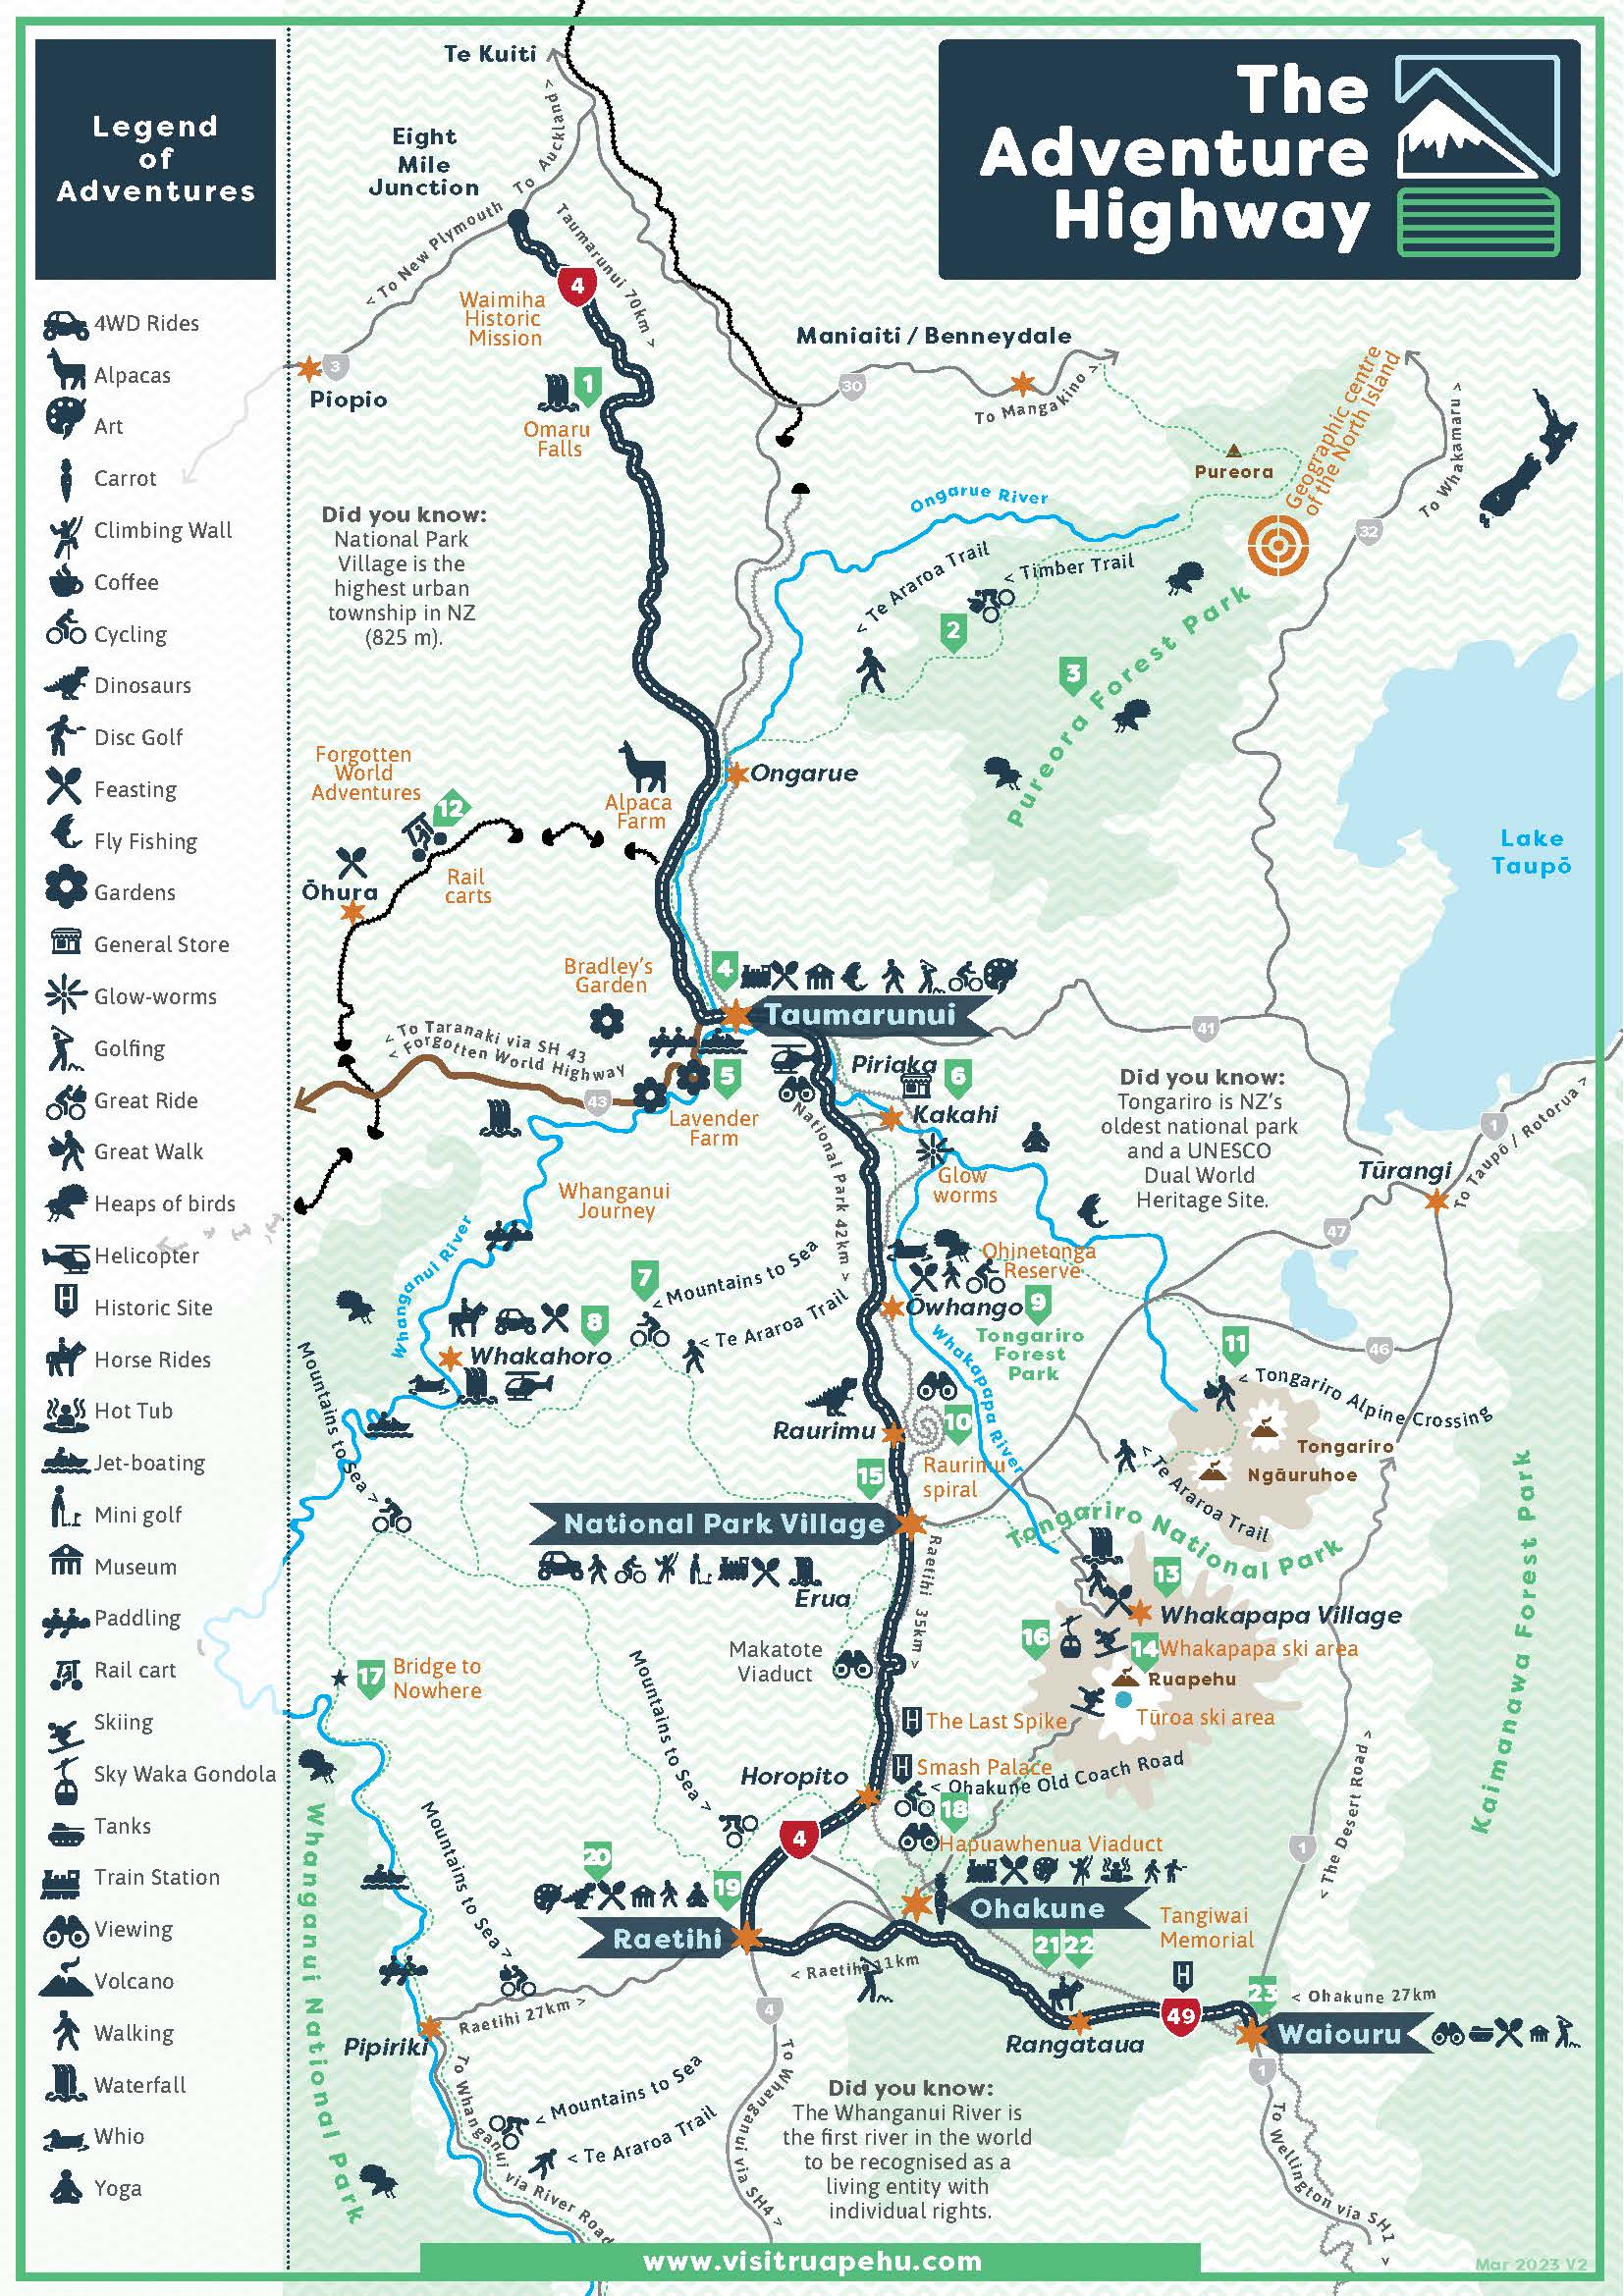 Adventure Highway Map Front Page_Page_1.jpg